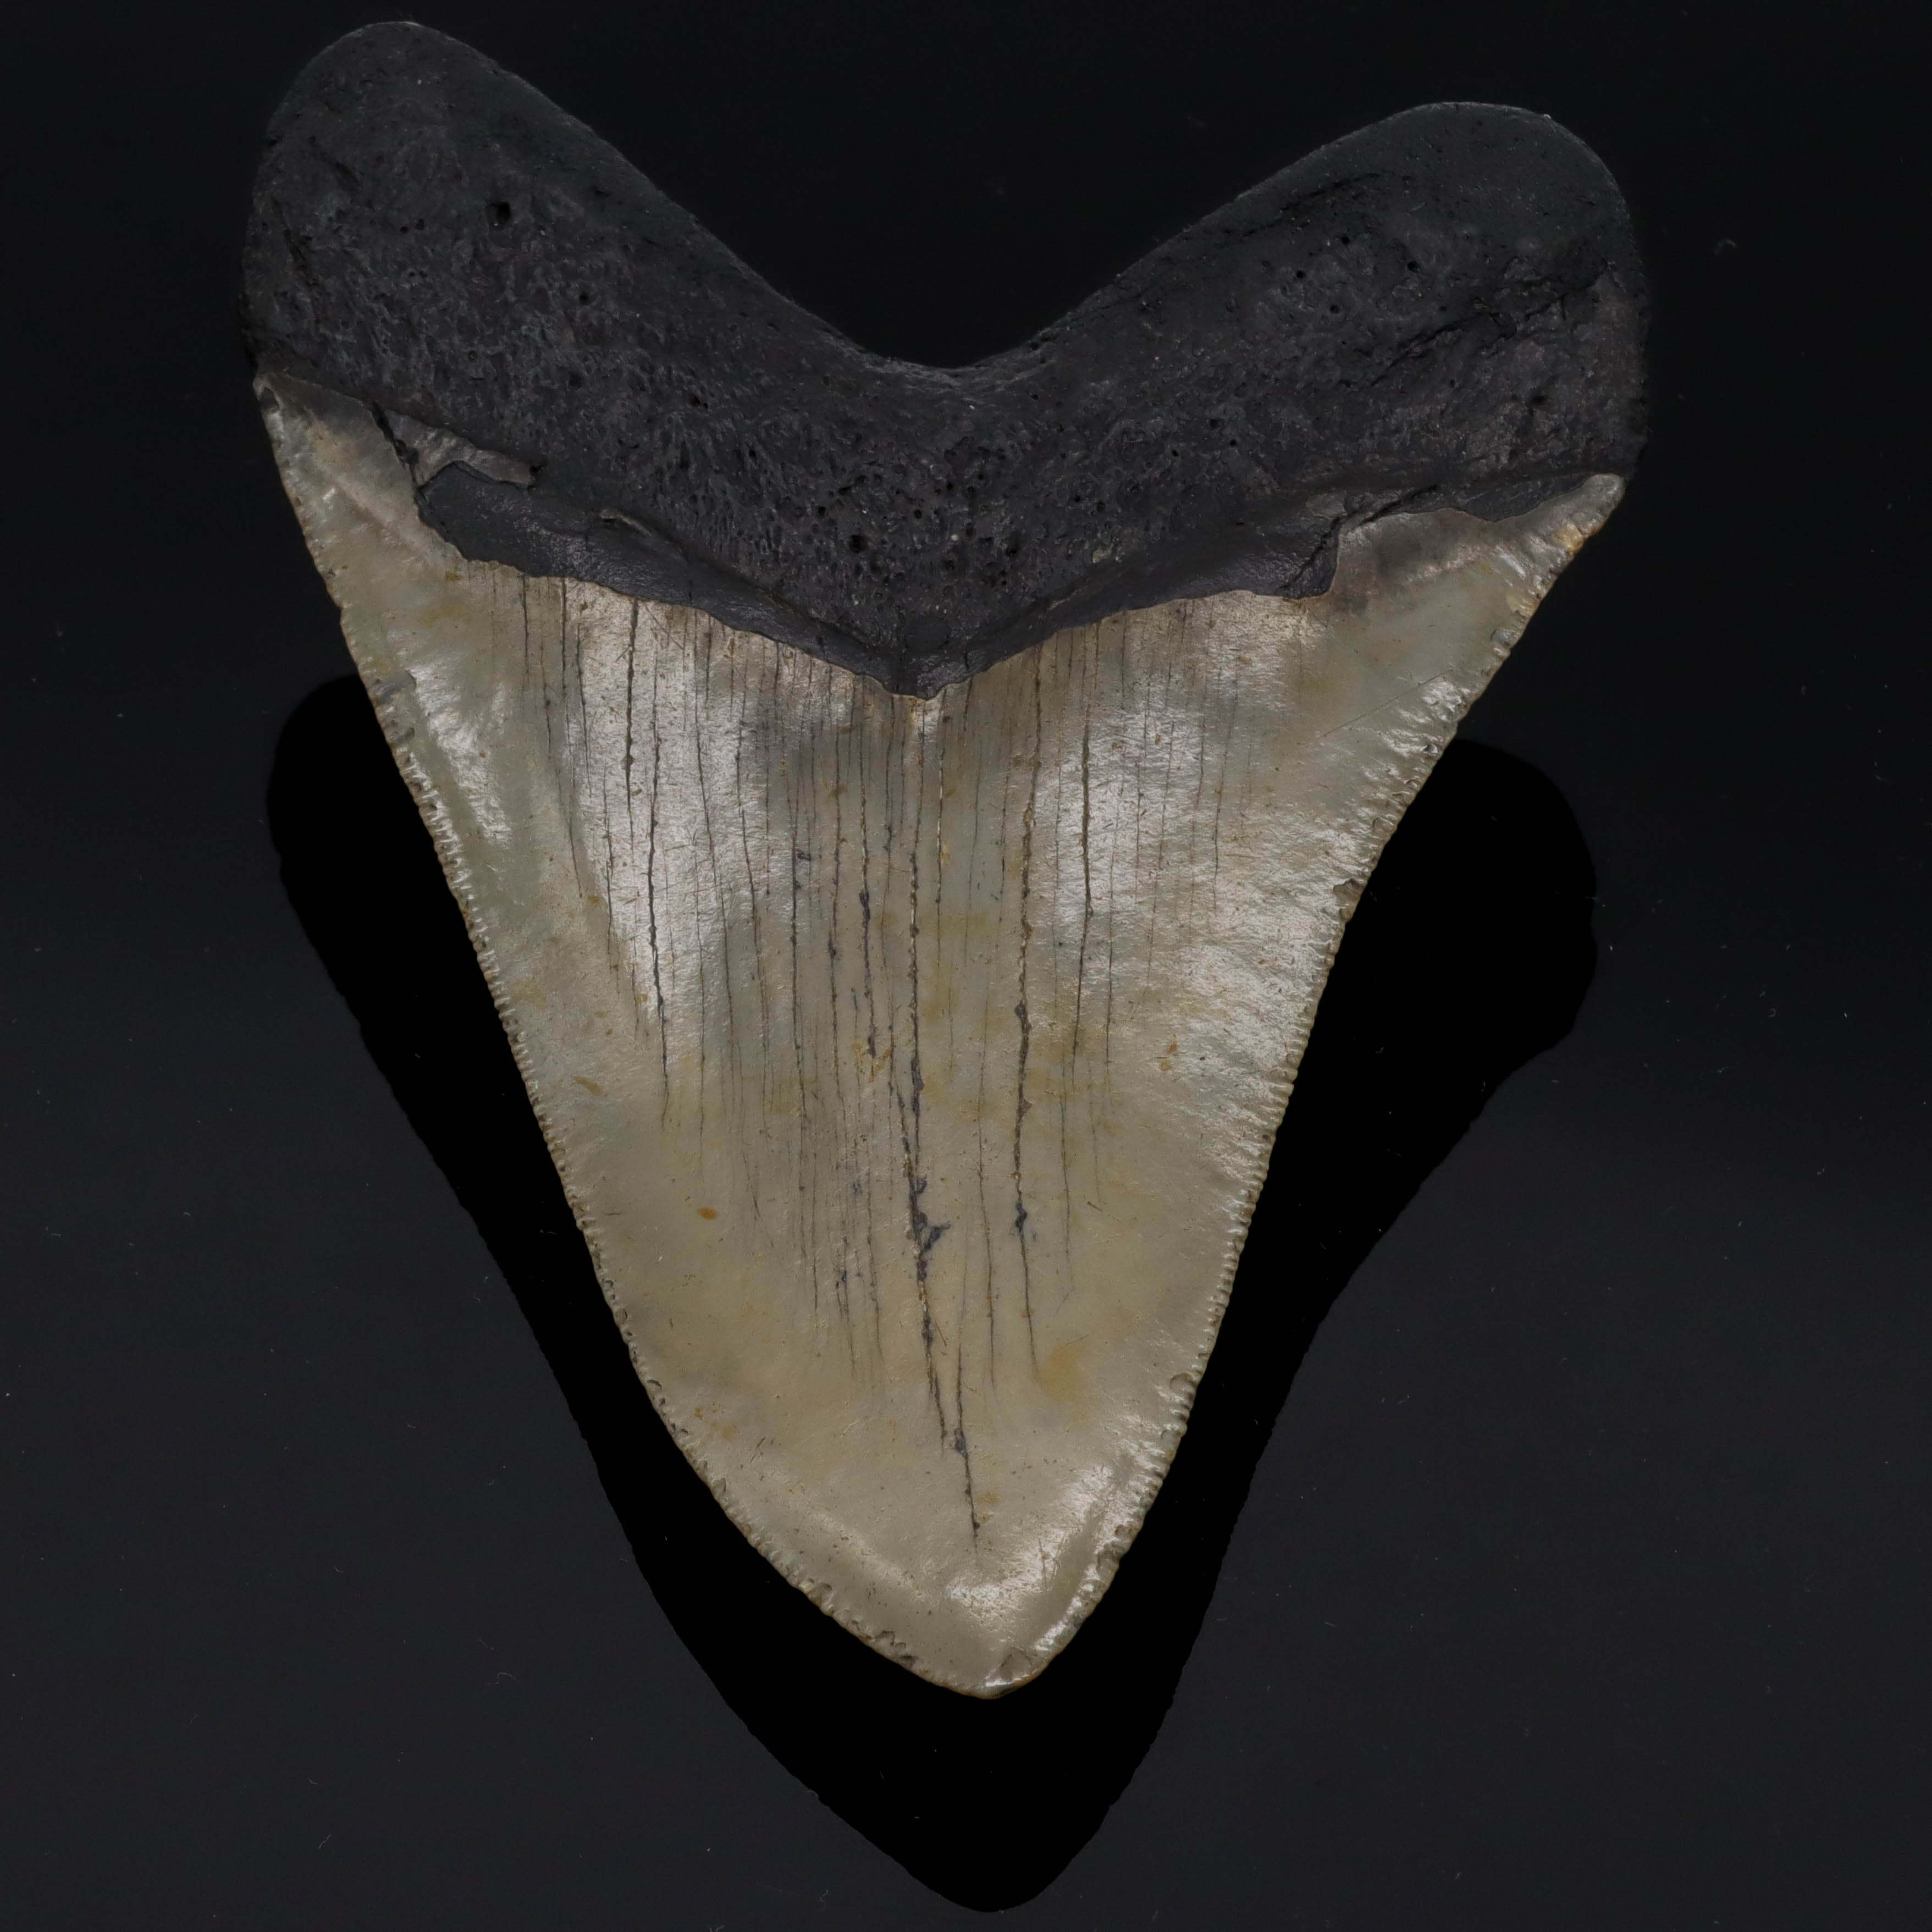 Megalodon tooth petrified 11.5cm 170g